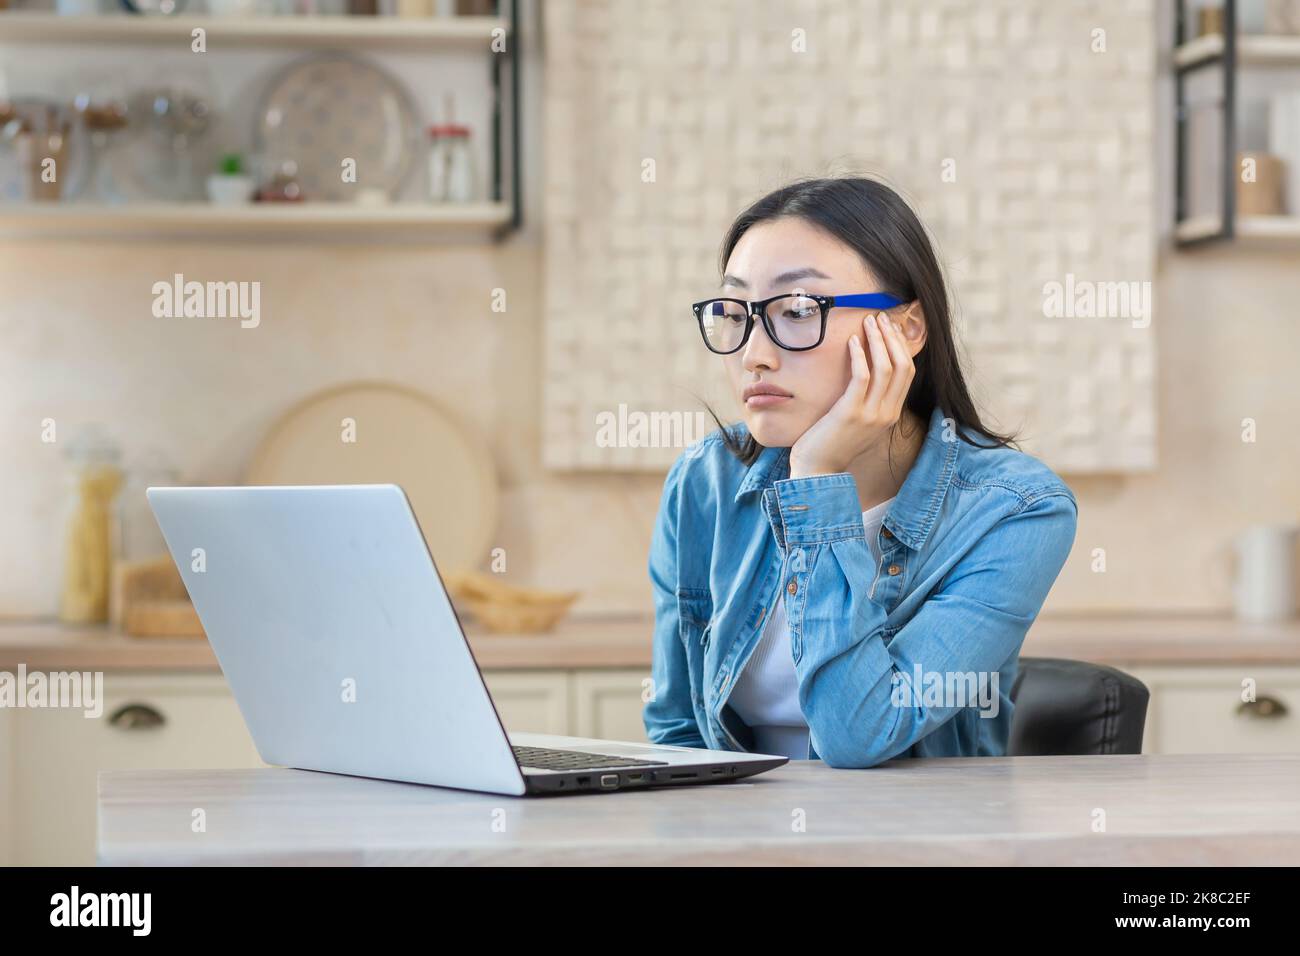 Tired young Asian woman freelancer sitting at a table with a laptop, bored, unable to start work. Works remotely at home during quarantine. Stock Photo